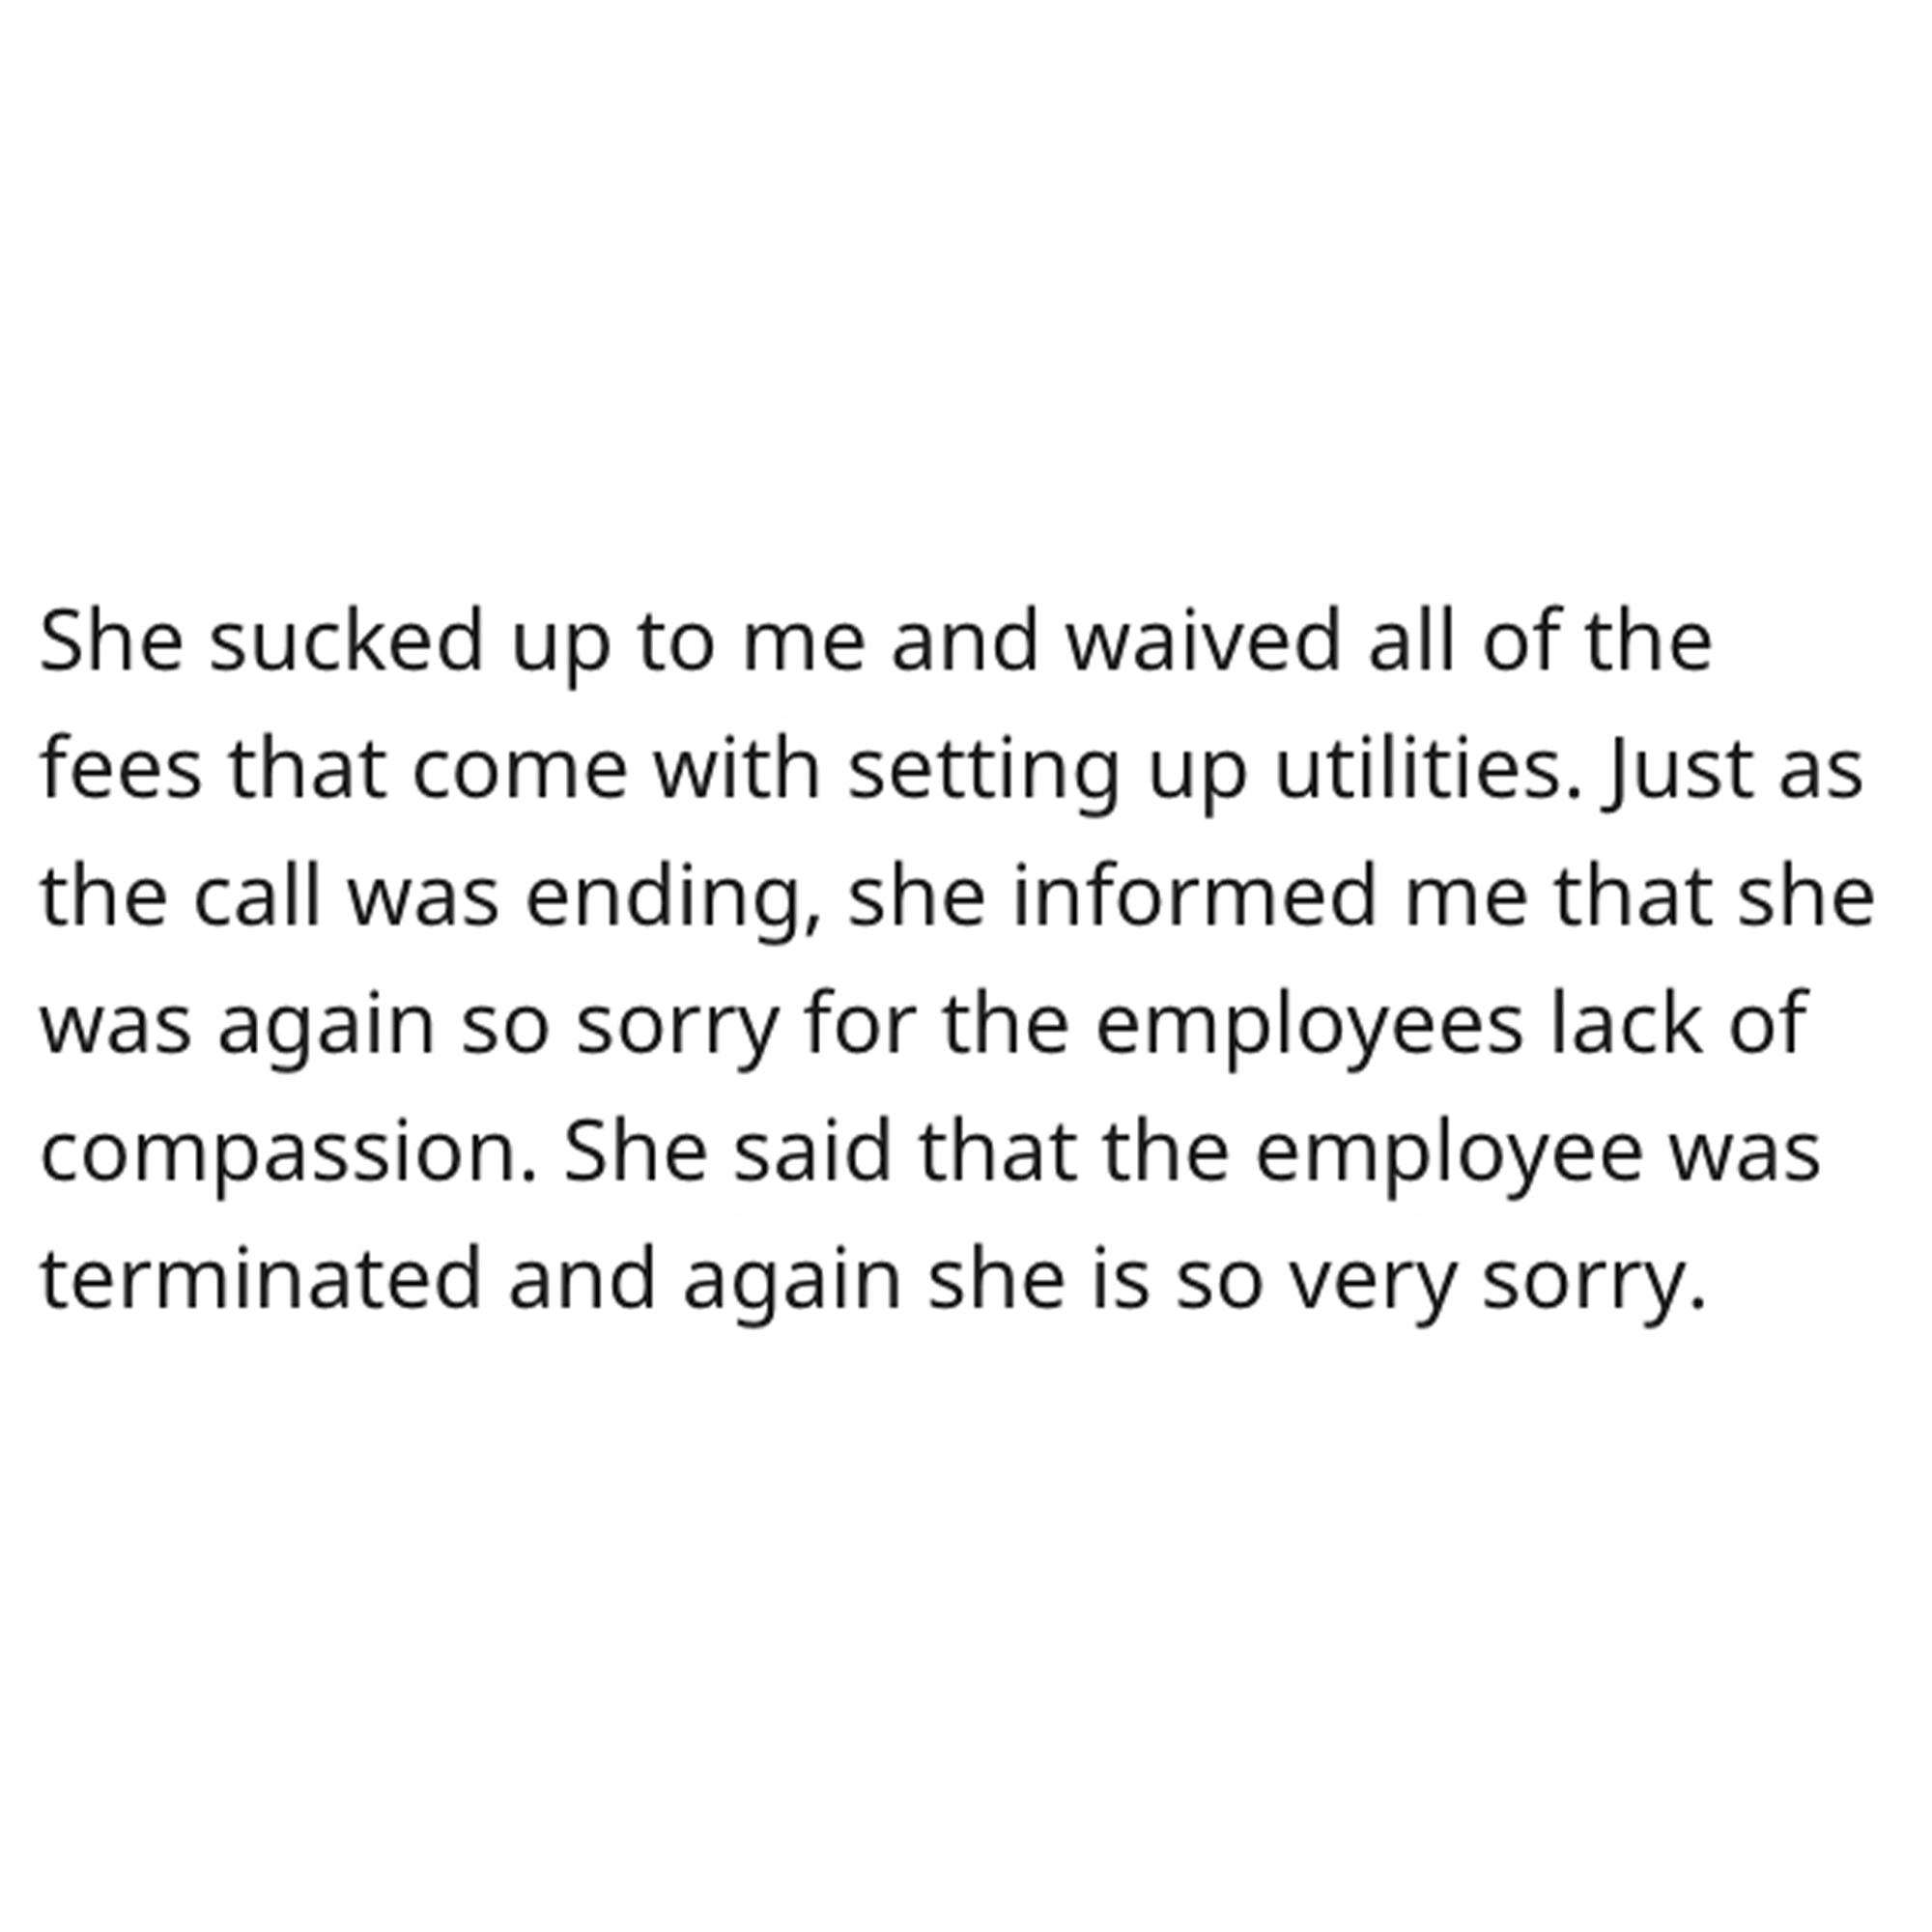 Dead Dad revenge story - angle - She sucked up to me and waived all of the fees that come with setting up utilities. Just as the call was ending, she informed me that she was again so sorry for the employees lack of compassion. She said that the employee 